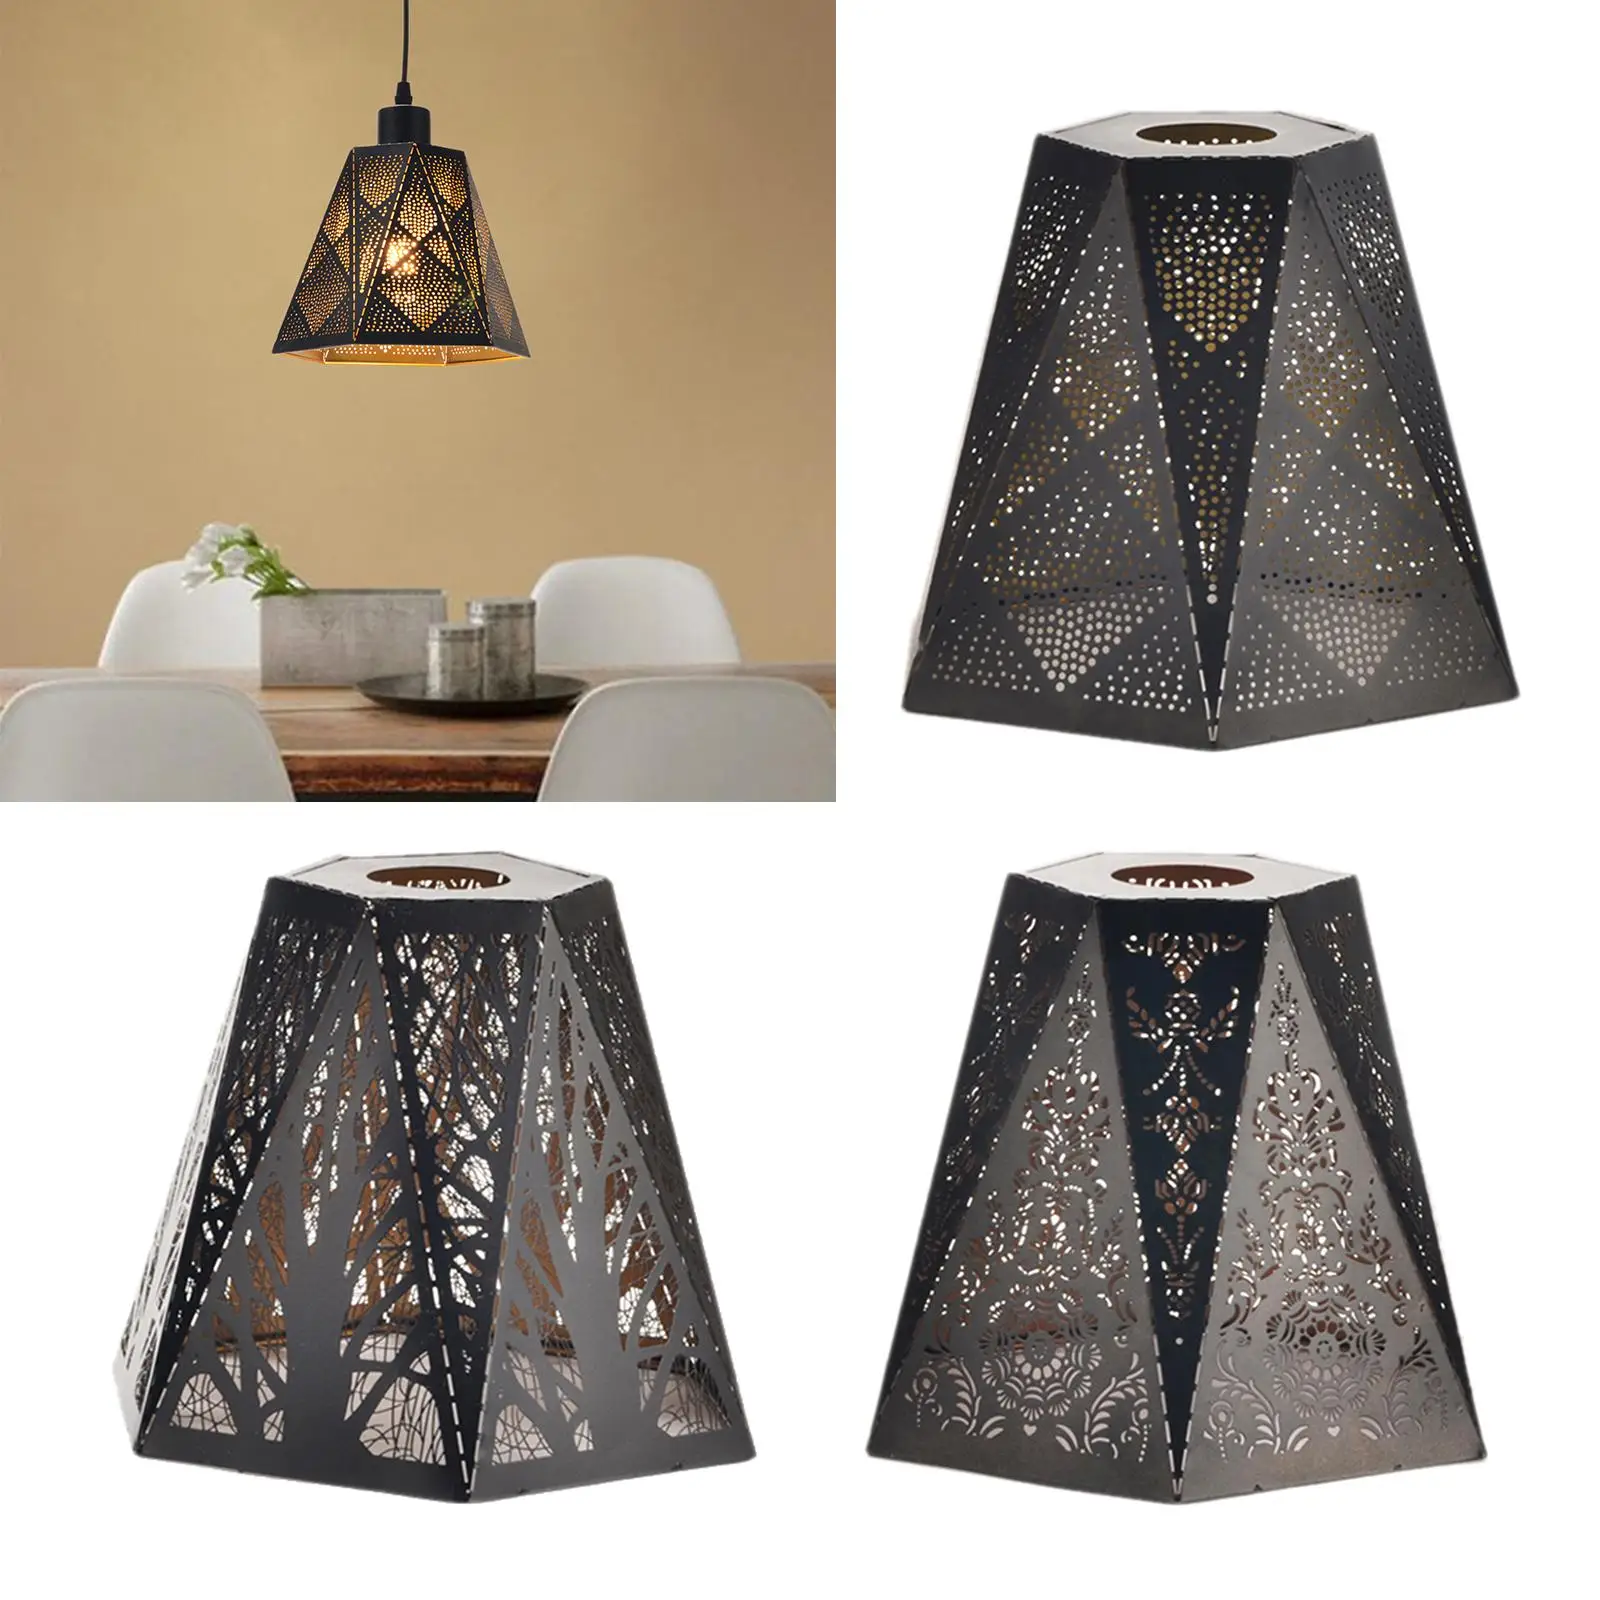 Rustic Style Lamp Shade Iron Lampshade Carving Metal Cage Hanging Light Cover Decorative for Bedside Hotel Hallway Bar Decor